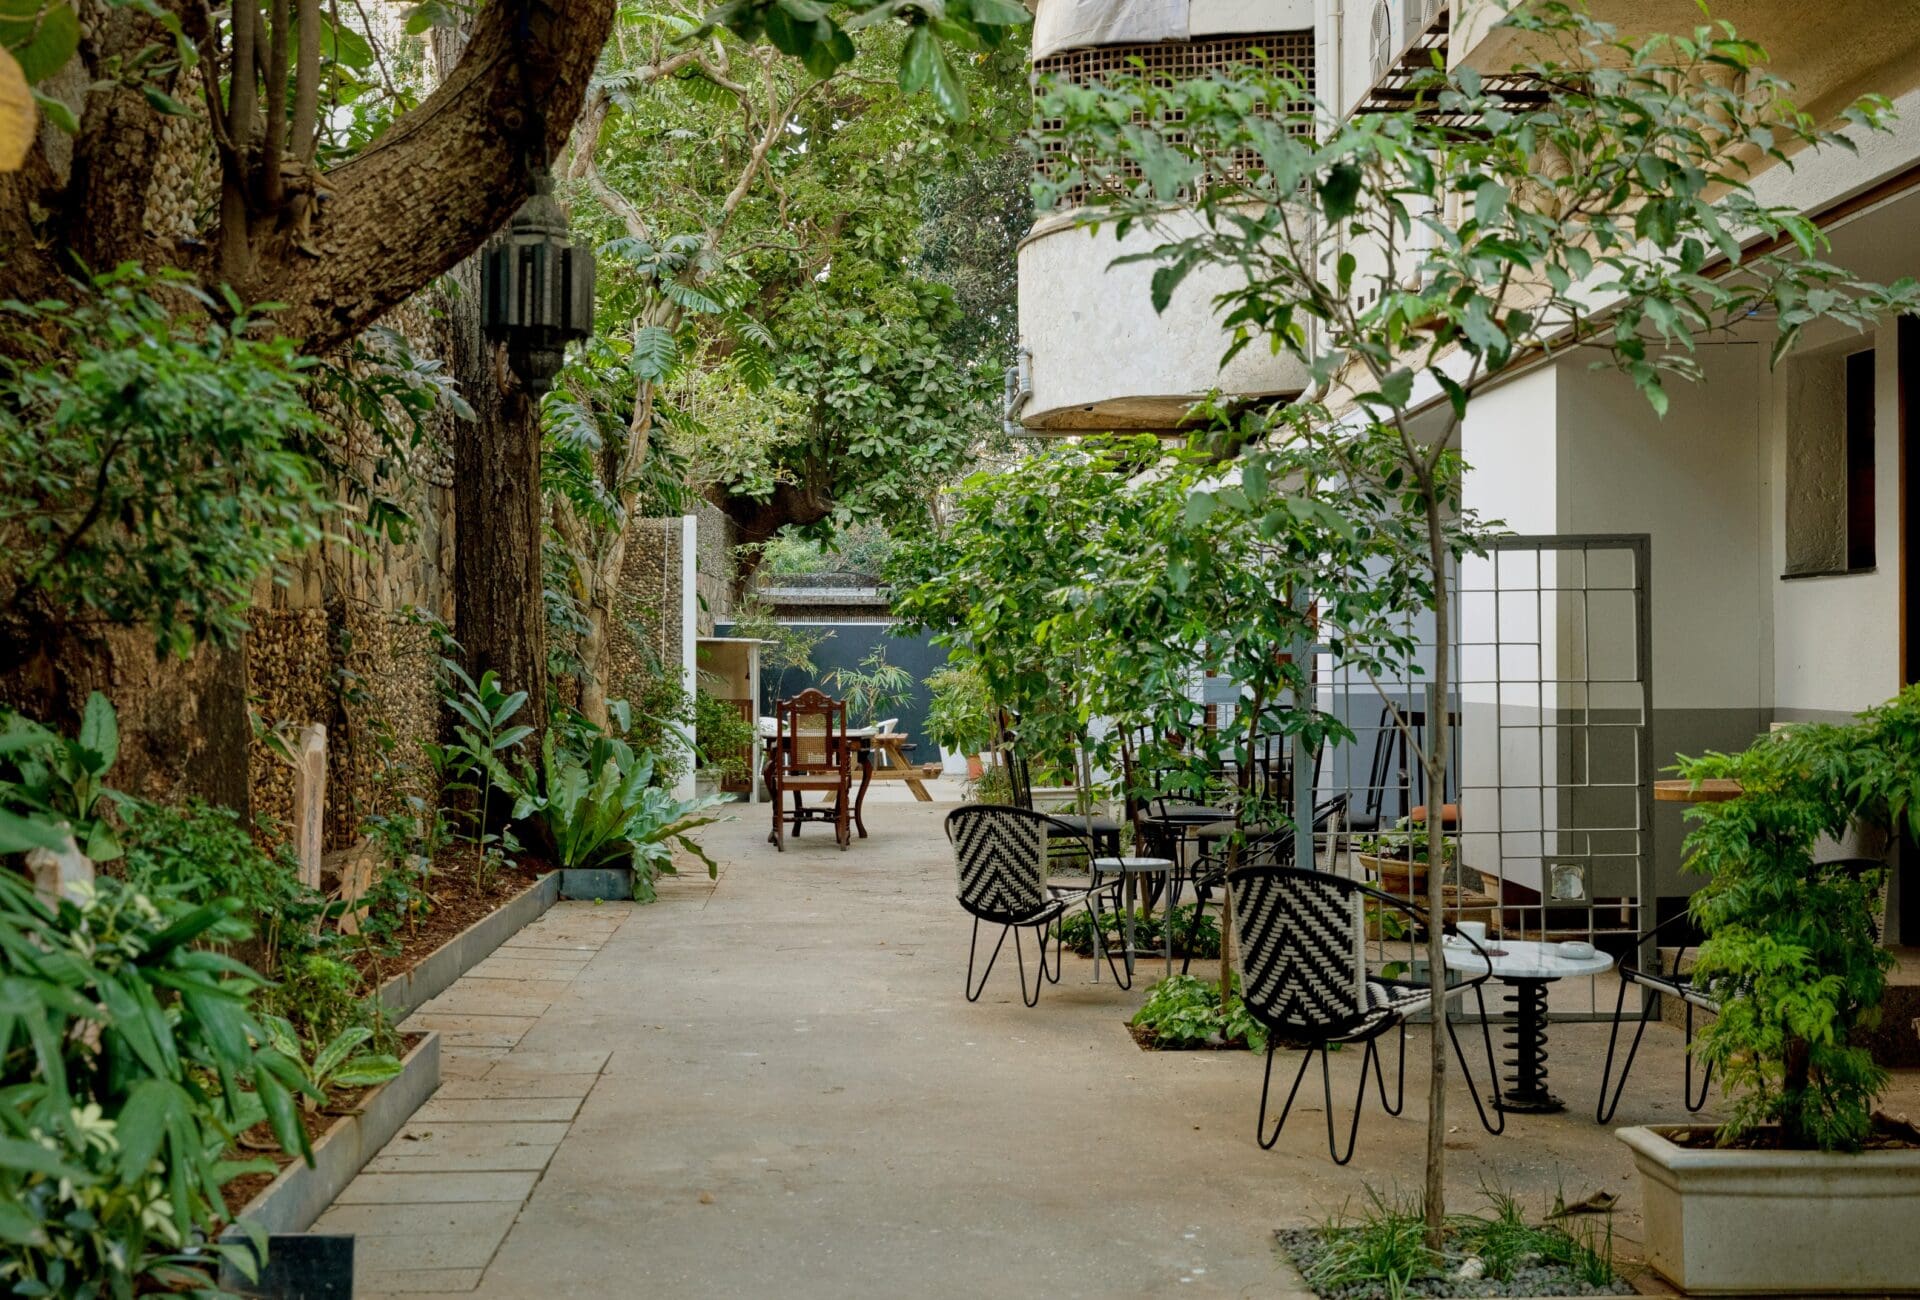 Best co-working spaces in Mumbai | The outdoor area at Kathiwada City House, with a paved patio, a tree a wrought-metal furniture